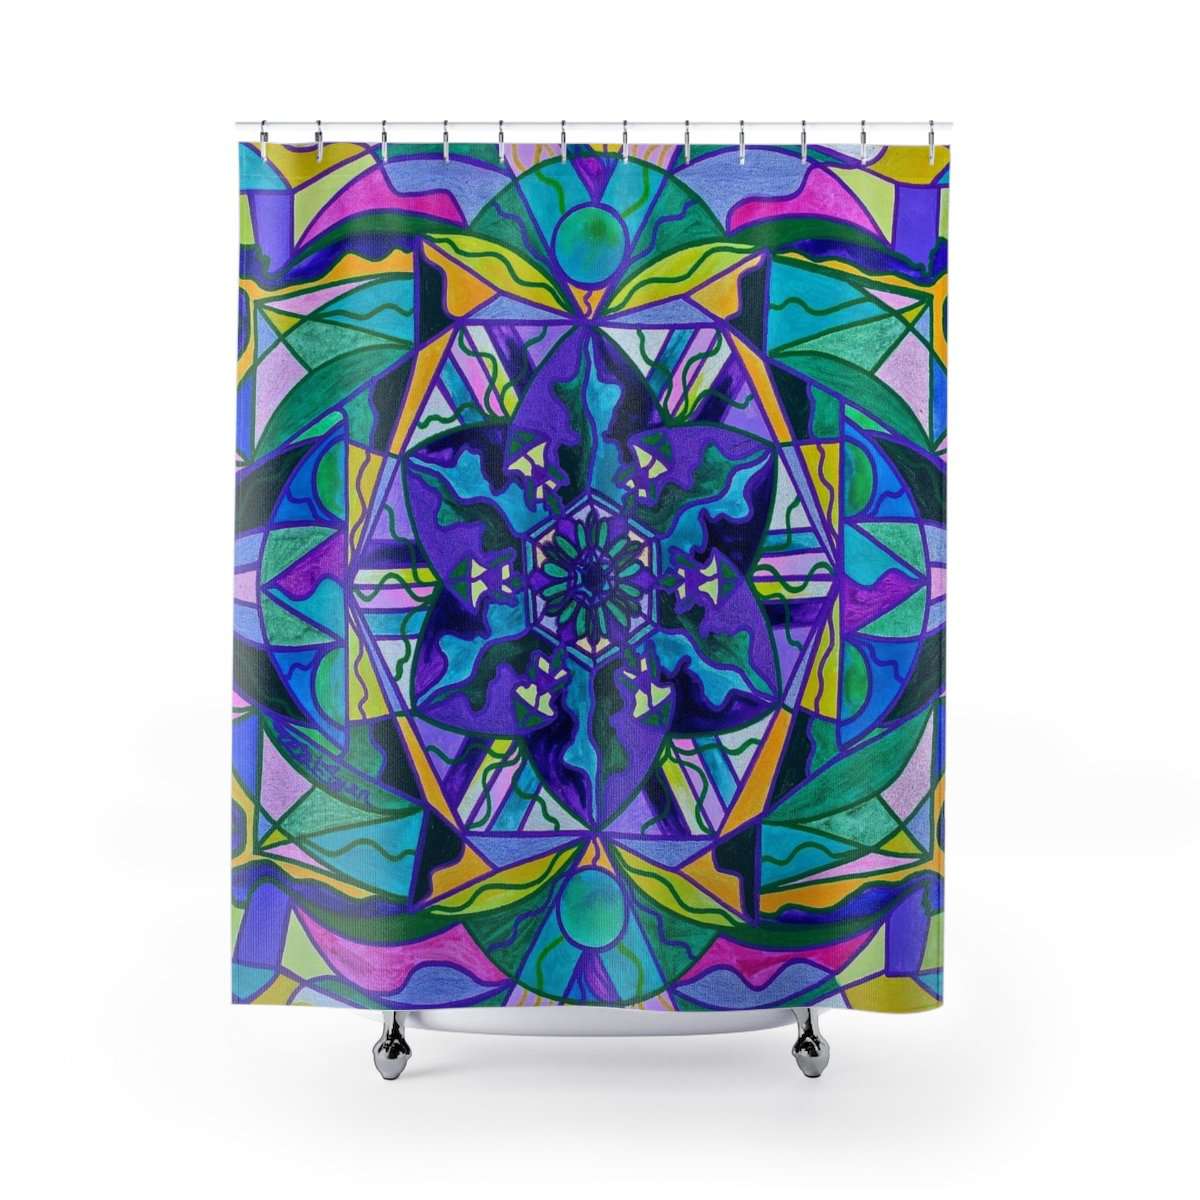 we-offer-the-lowest-prices-on-hope-shower-curtains-online-now_0.jpg